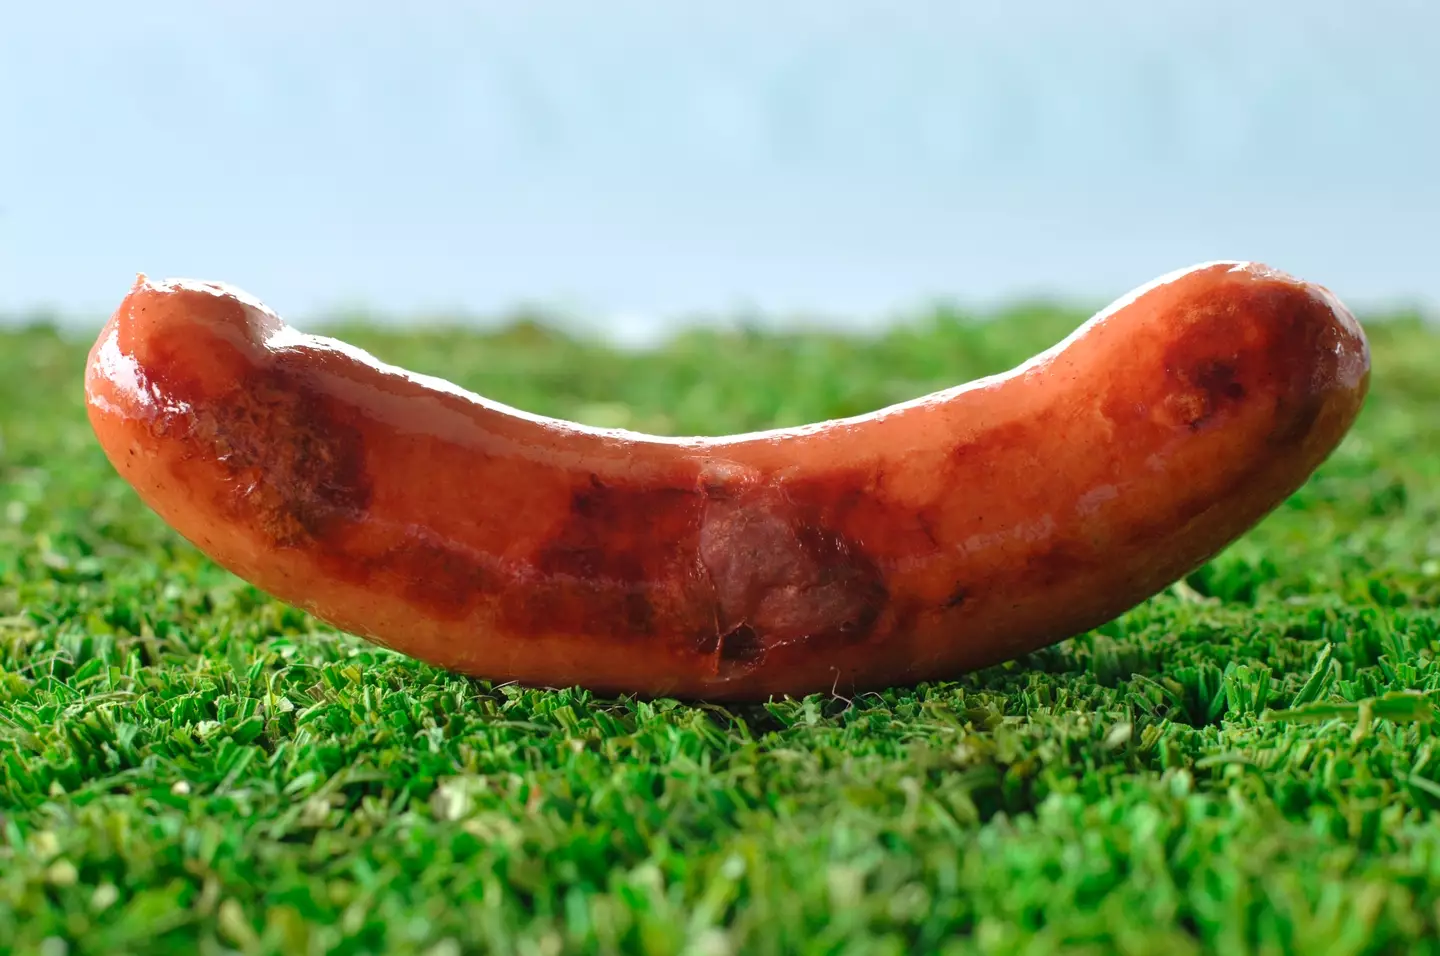 The thick, tough skin on sausages can prove difficult for little teeth to break through.